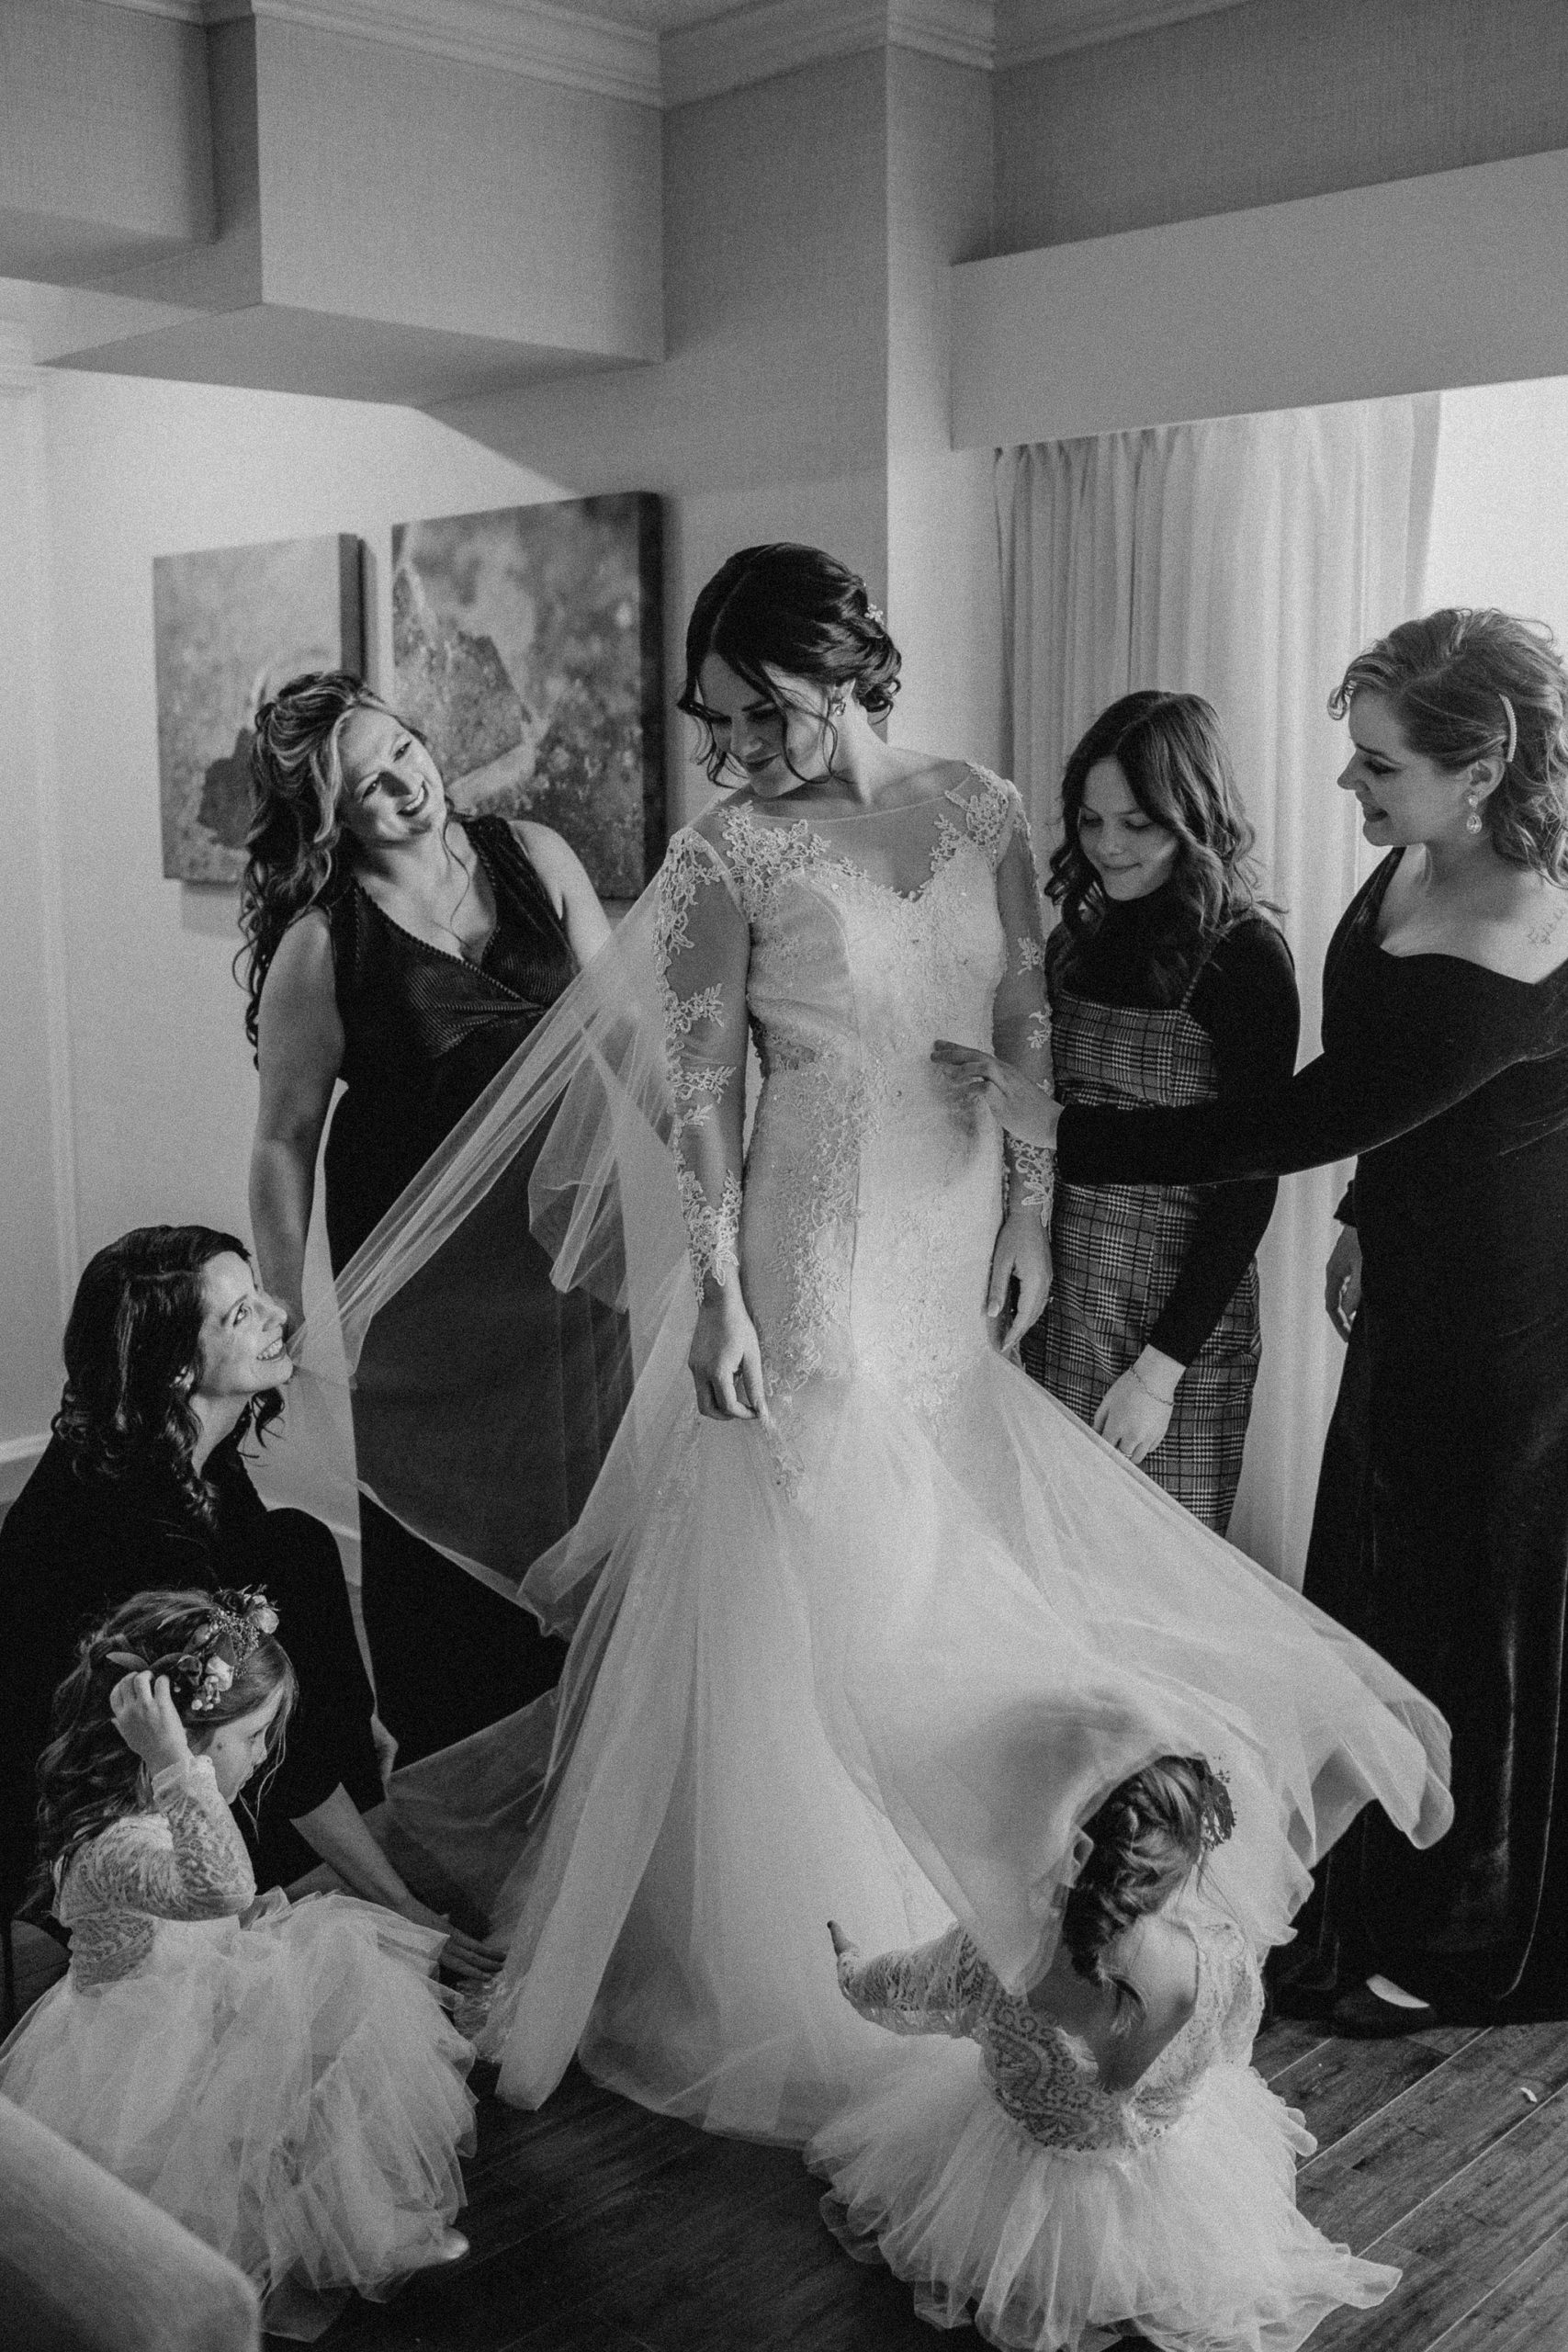 Black and white photo of bride and her bridal party fluffing her dress before her wedding ceremony.